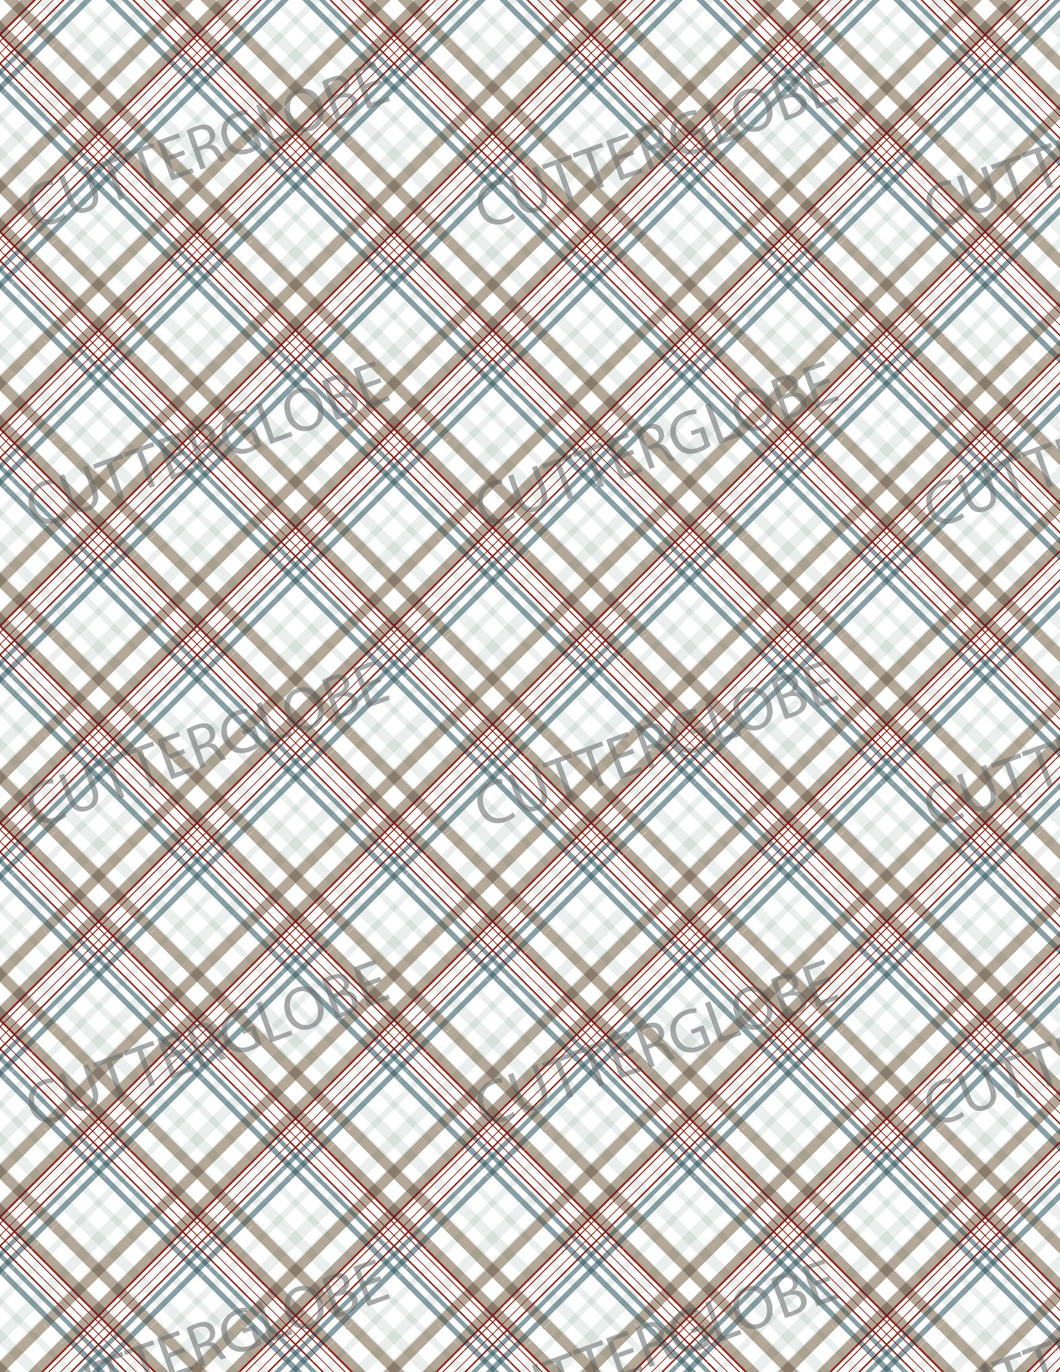 Gingham 003 Transfer (Brown Red Blue)